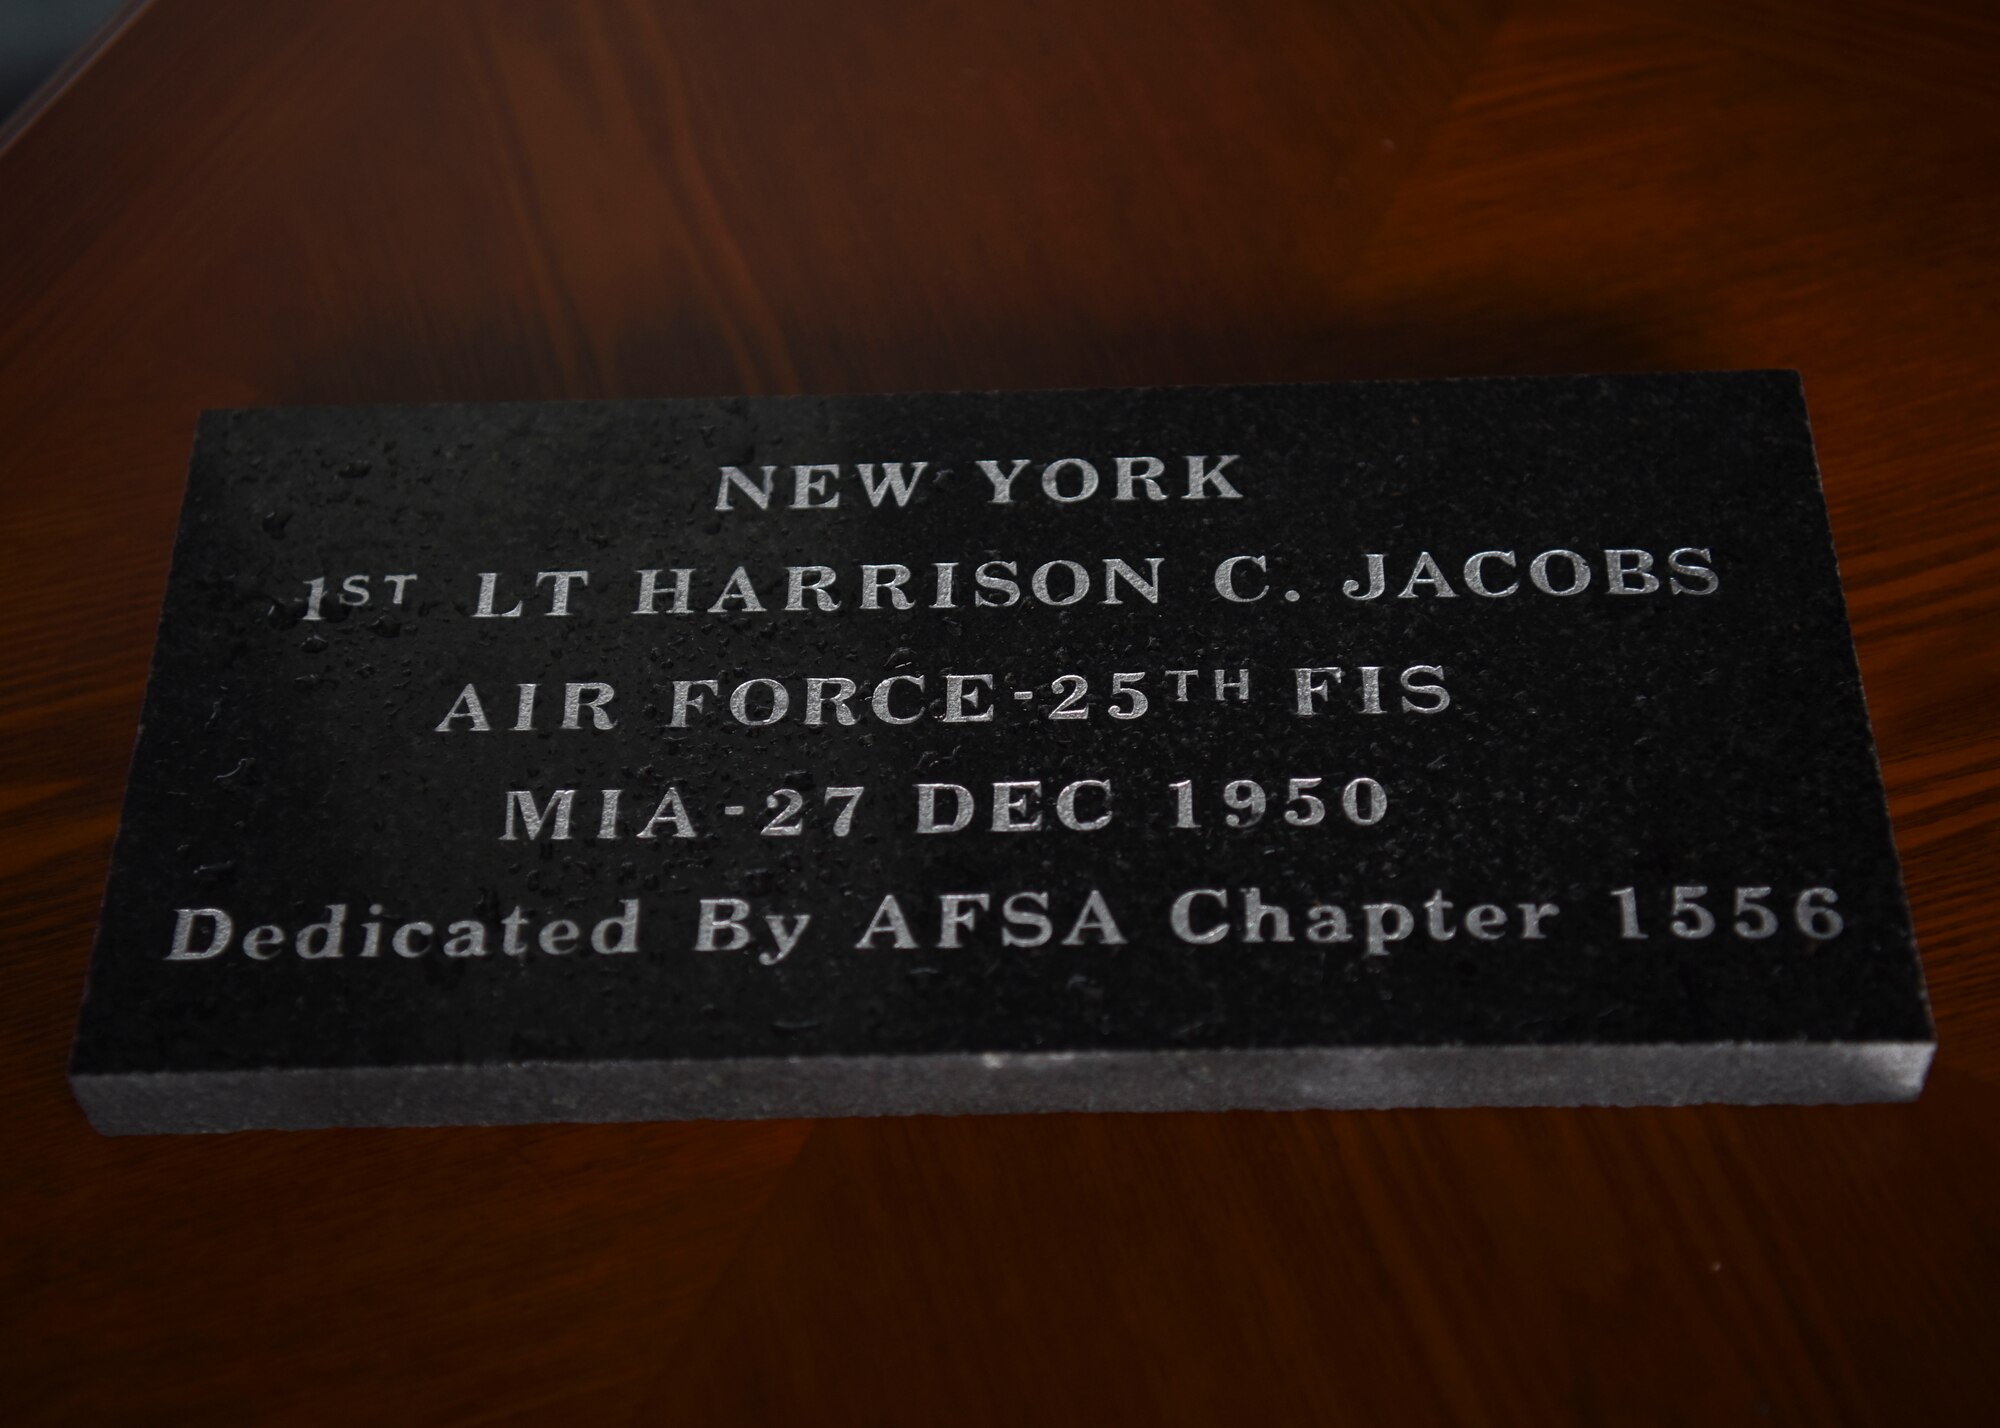 A commemorative brick is set on display during a POW/MIA Recognition Day ceremony at Osan Air Base, Republic of Korea, Sept. 16, 2020. The brick was dedicated to 1st Lt. Jacob Harrison, a pilot with the 25th Fighter Interceptor Squadron, who was declared missing in action after his aircraft was shot down over the Pacific Ocean during the Korean War. (U.S. Air Force photo by Senior Airman Denise Jenson)